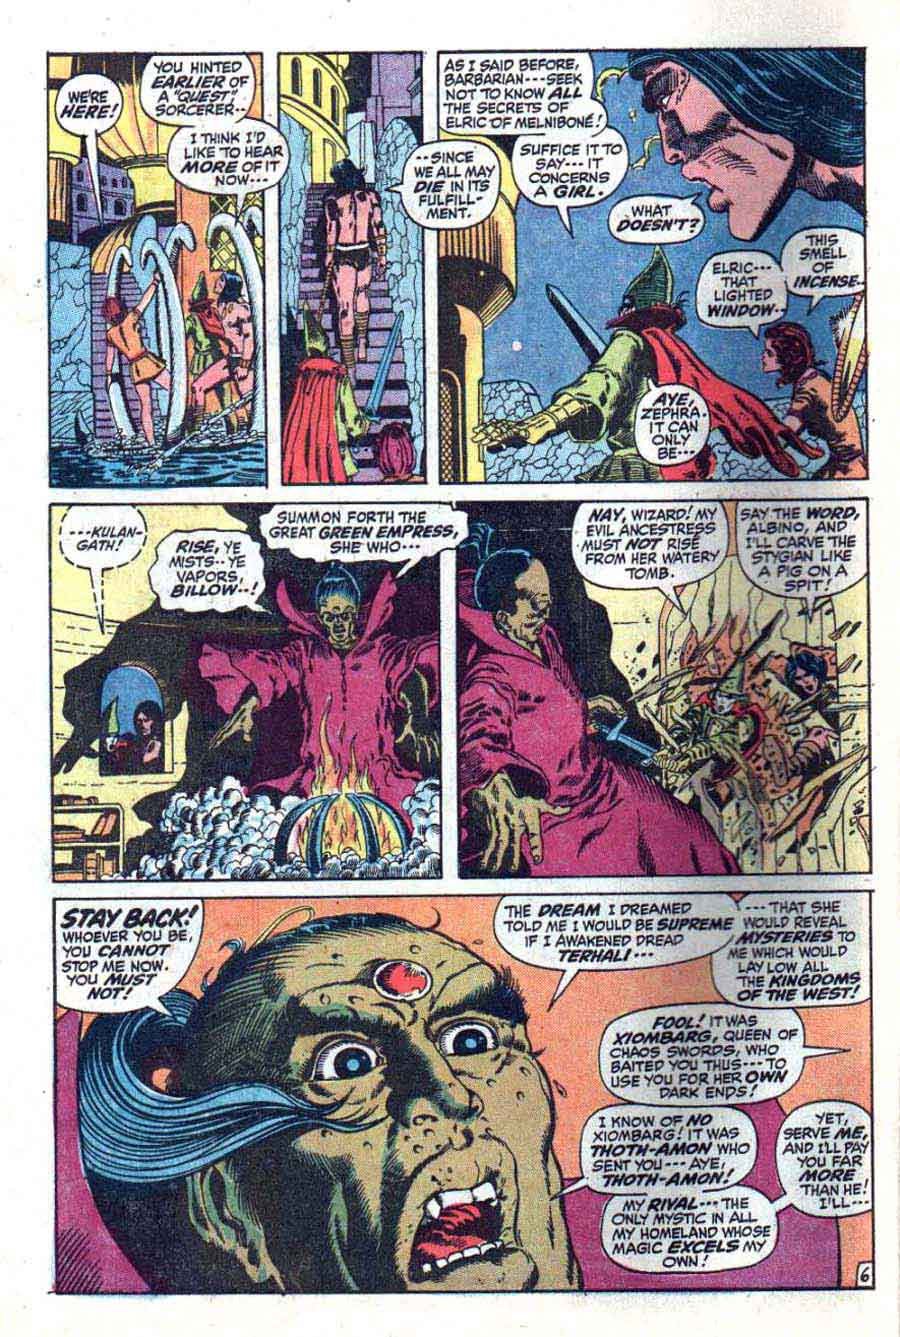 Conan the Barbarian v1 #15 marvel comic book page art by Barry Windsor Smith